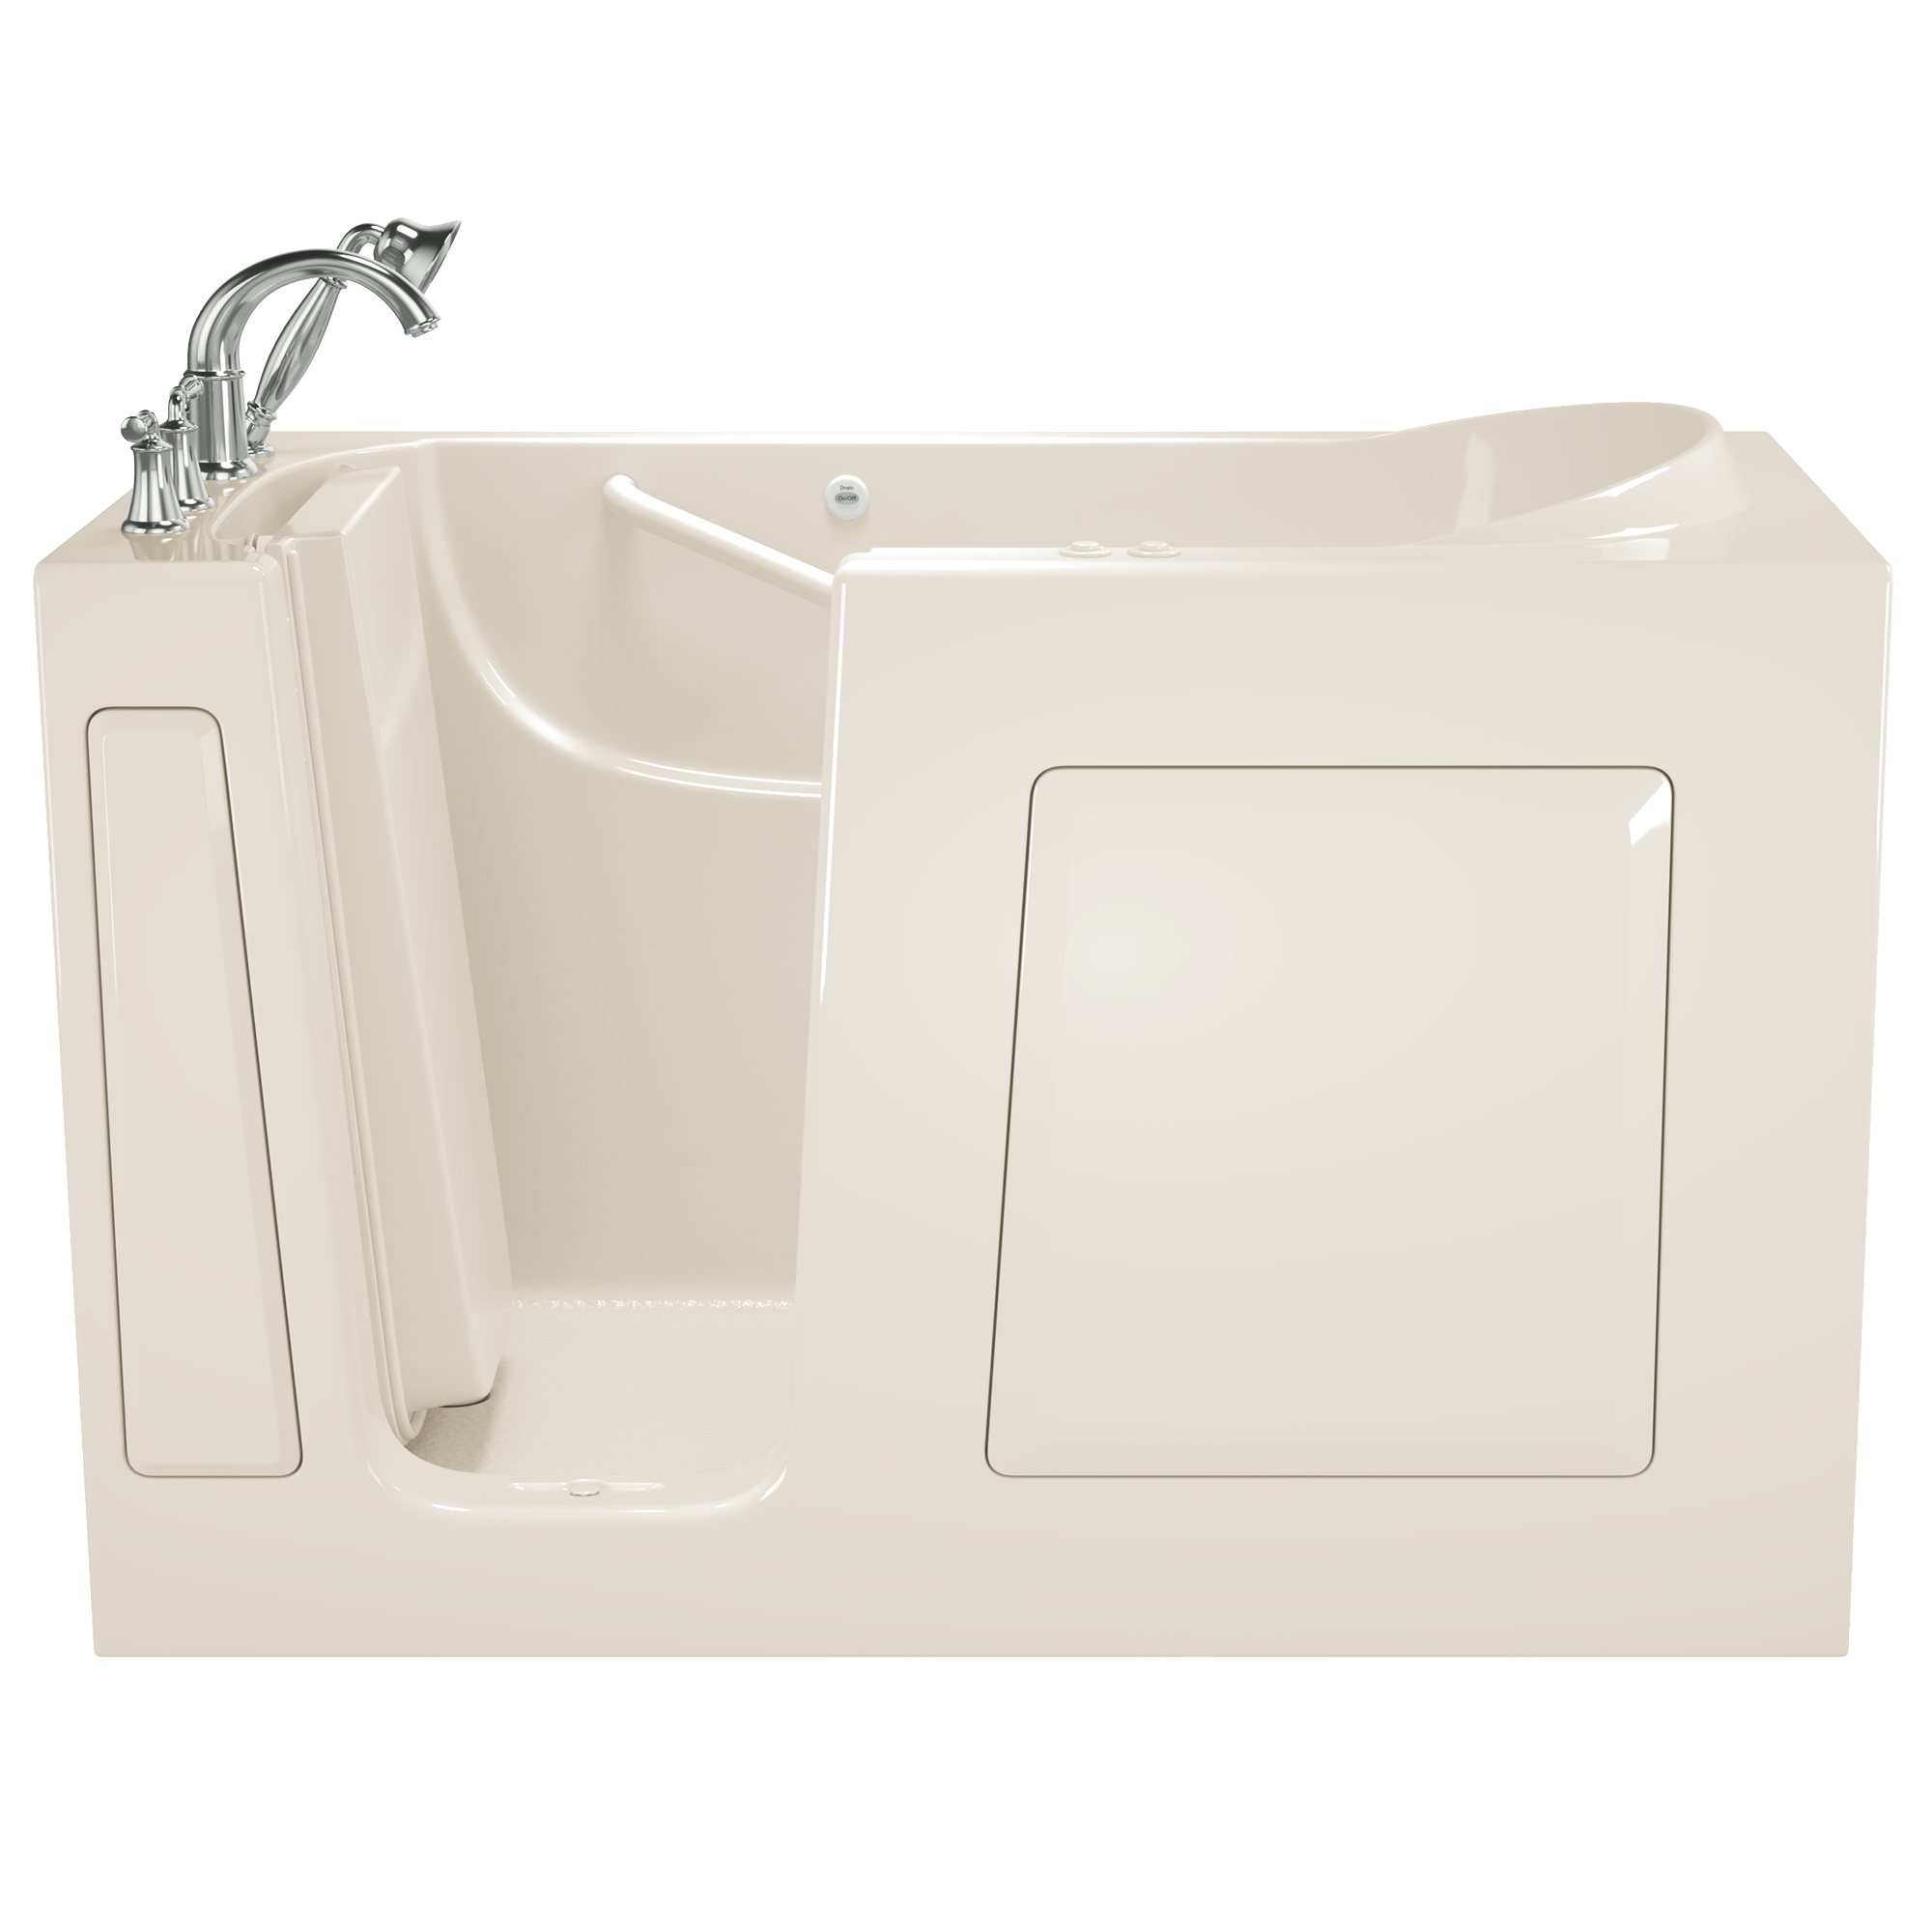 Gelcoat Value Series 30 x 60 -Inch Walk-in Tub With Combination Air Spa and Whirlpool Systems - Left-Hand Drain With Faucet